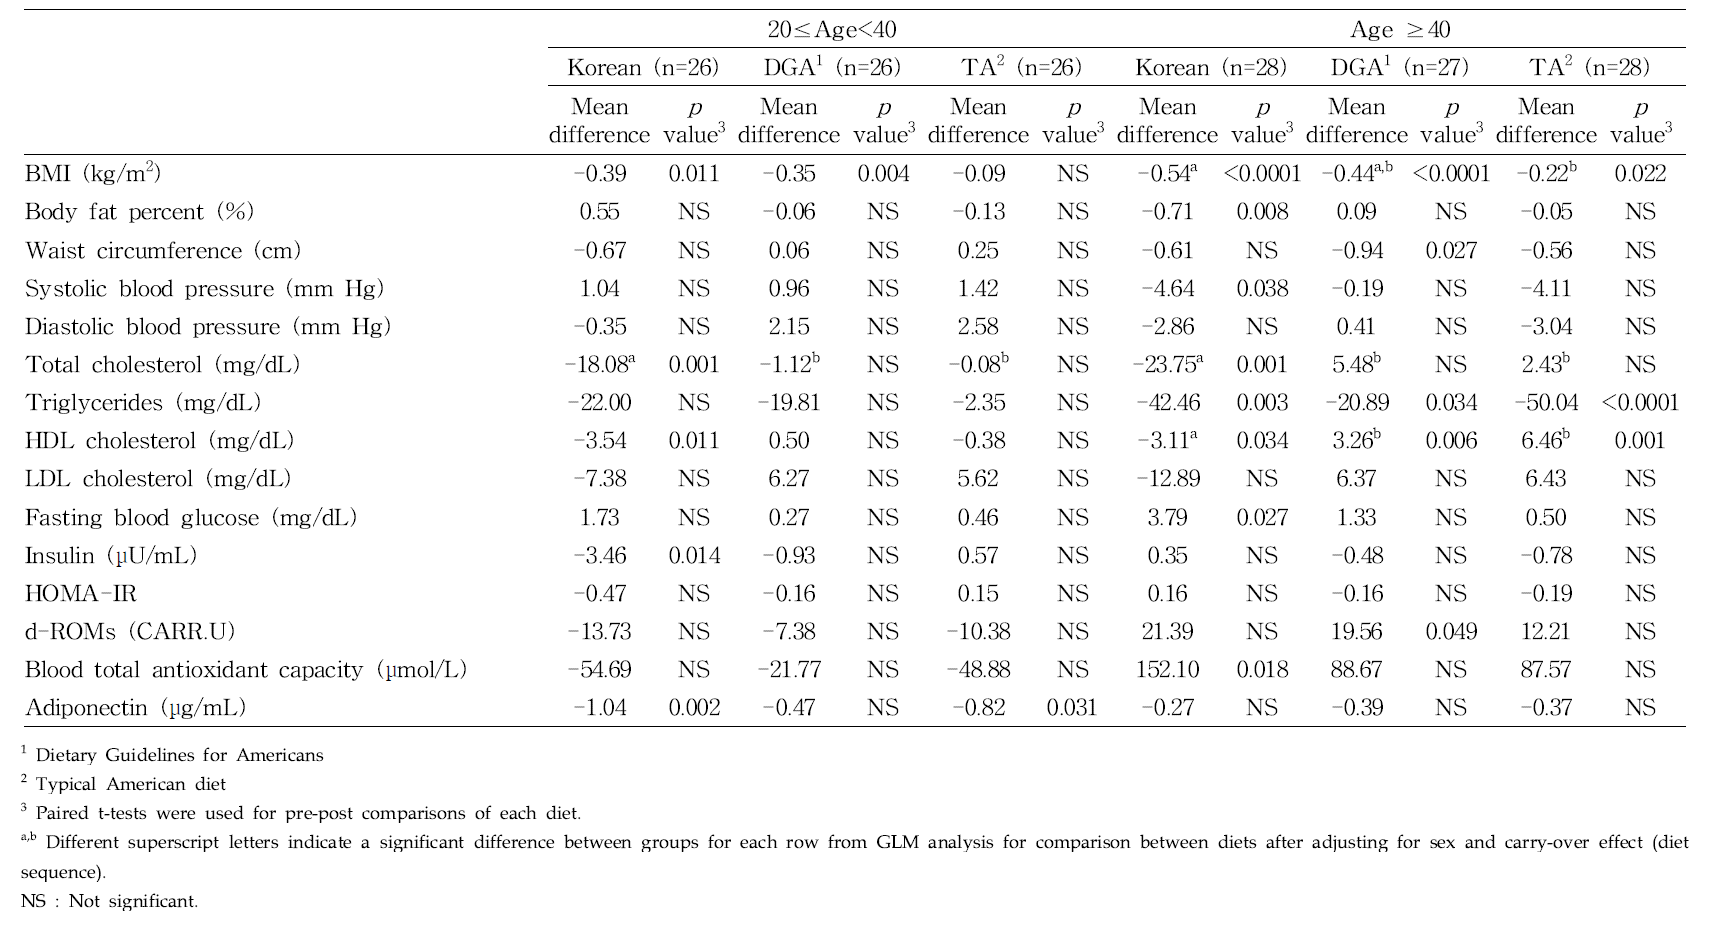 Changes in anthropometric and biochemical parameters by age group according to experimental diet